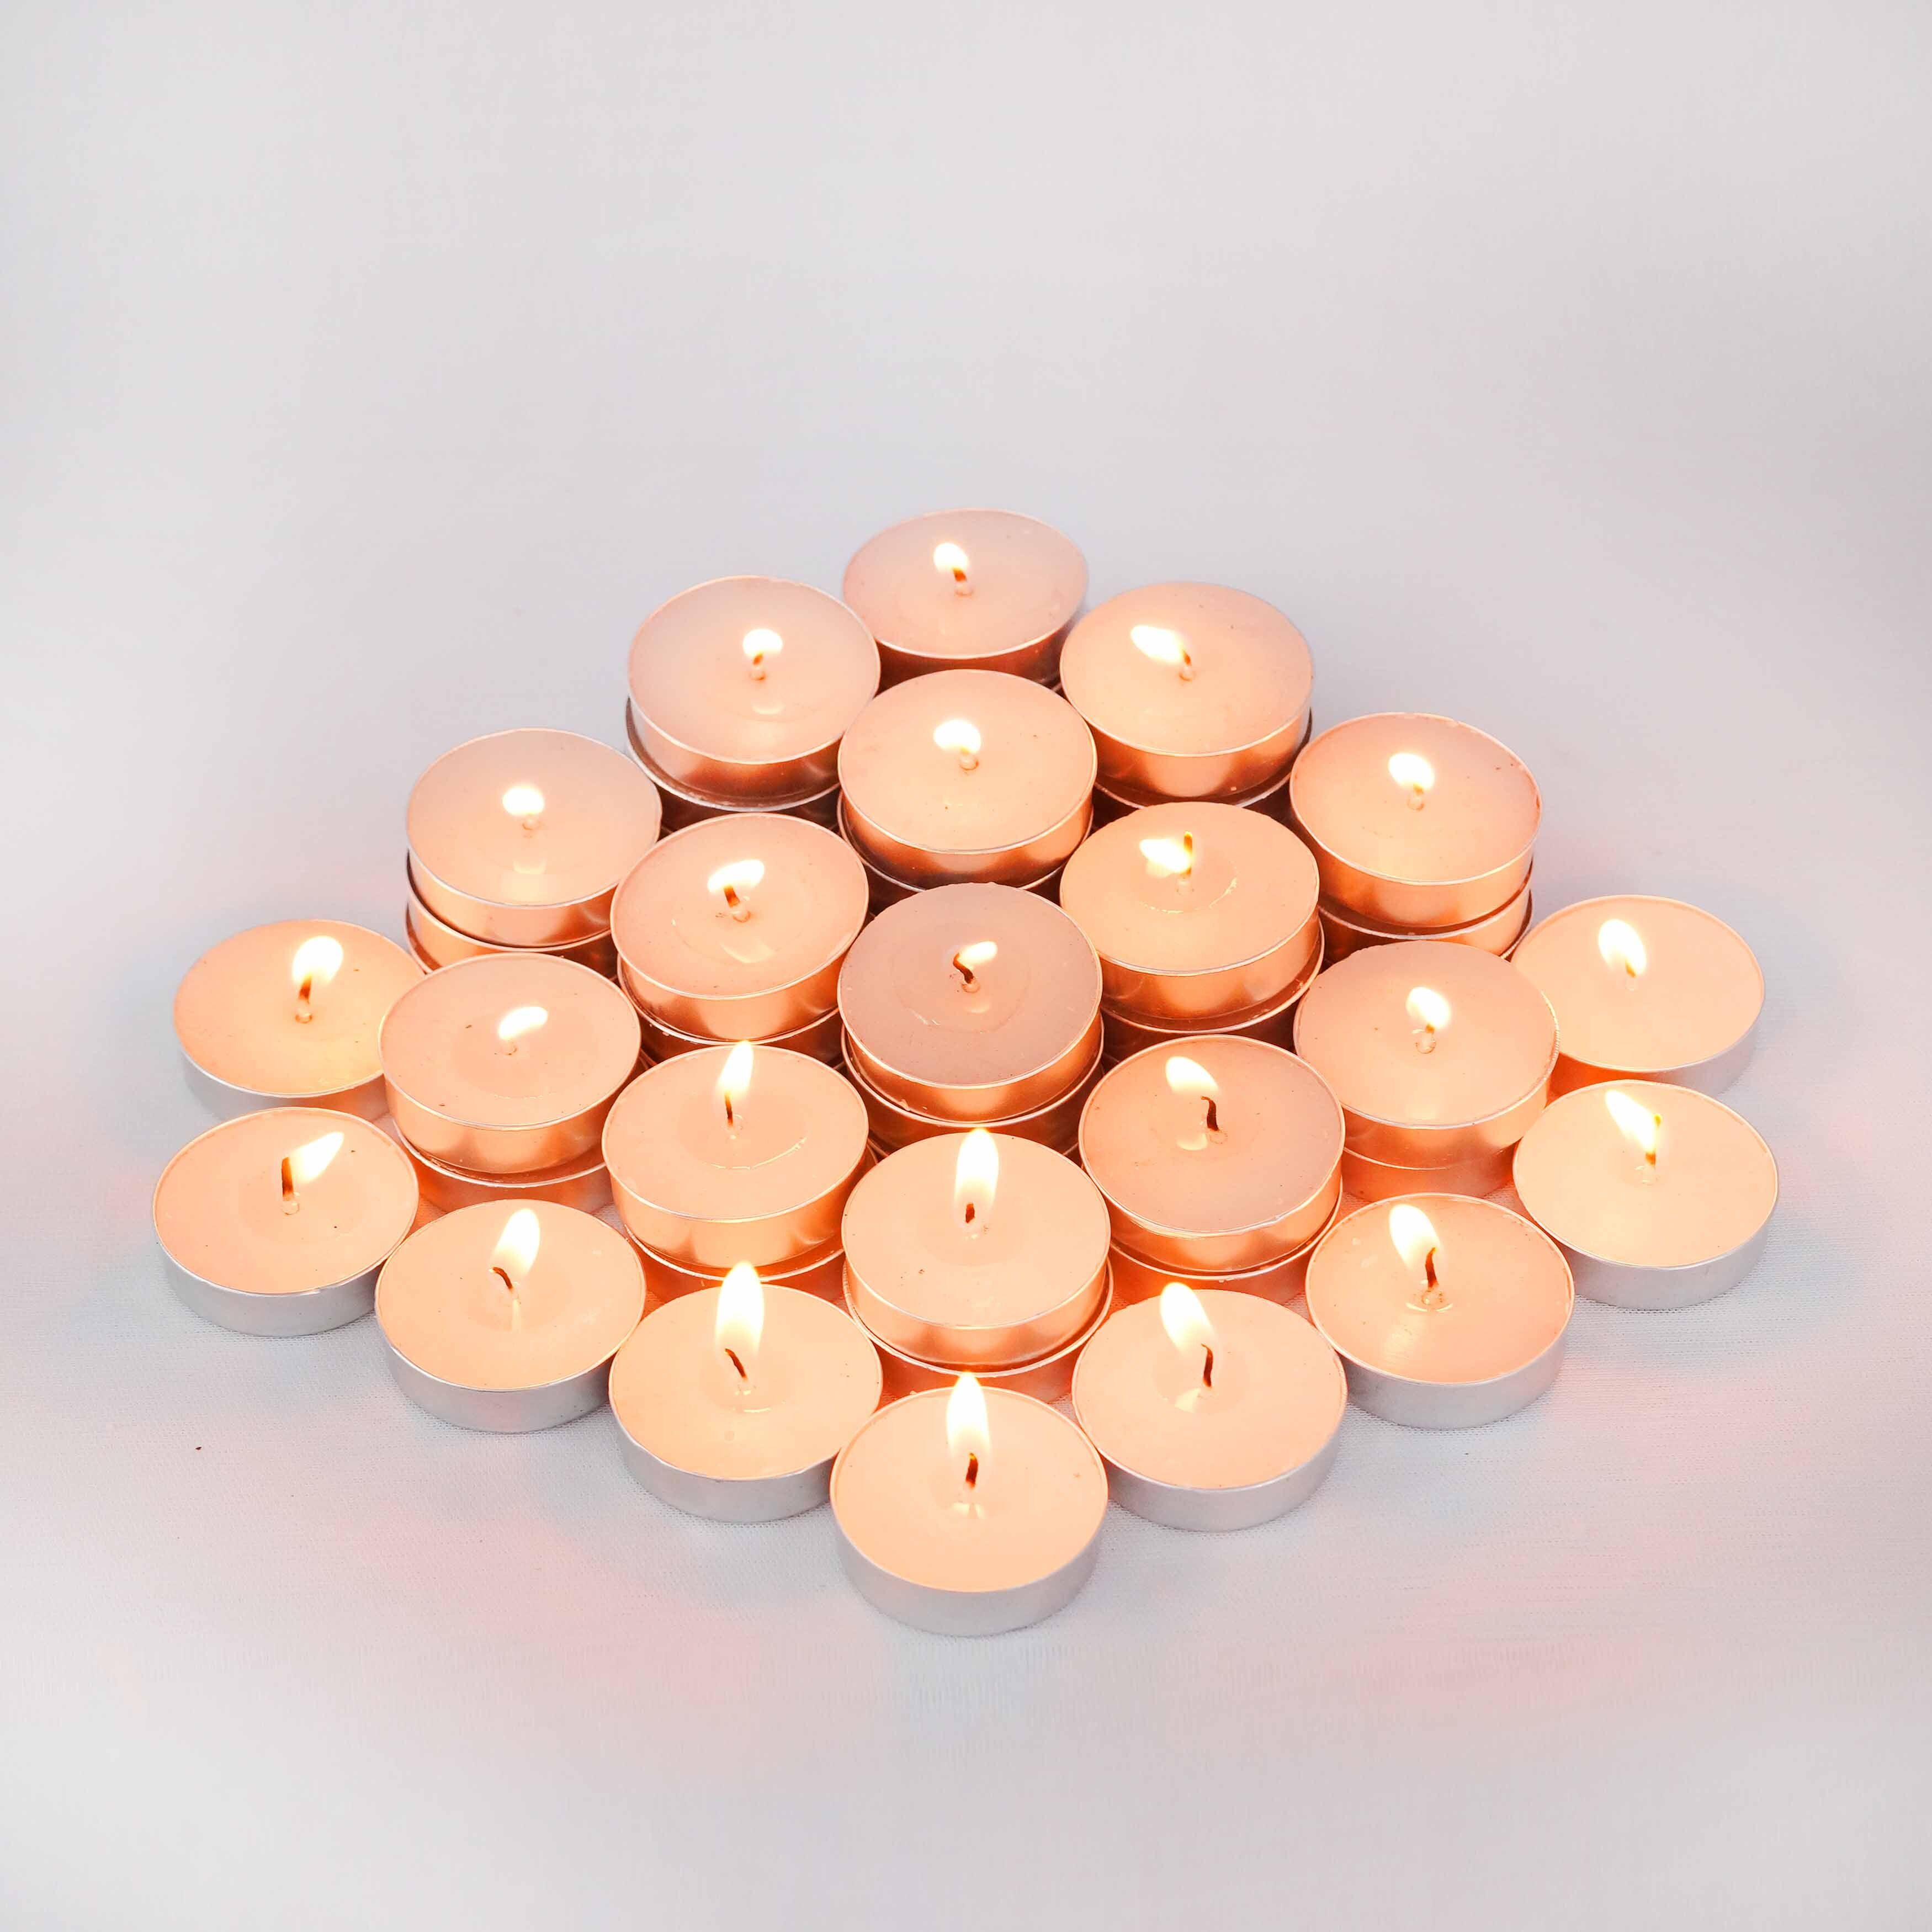 Asian Aura Smokeless T-Light Candles 3-4 Hrs Burning Time Candle Candle White Pack of 40